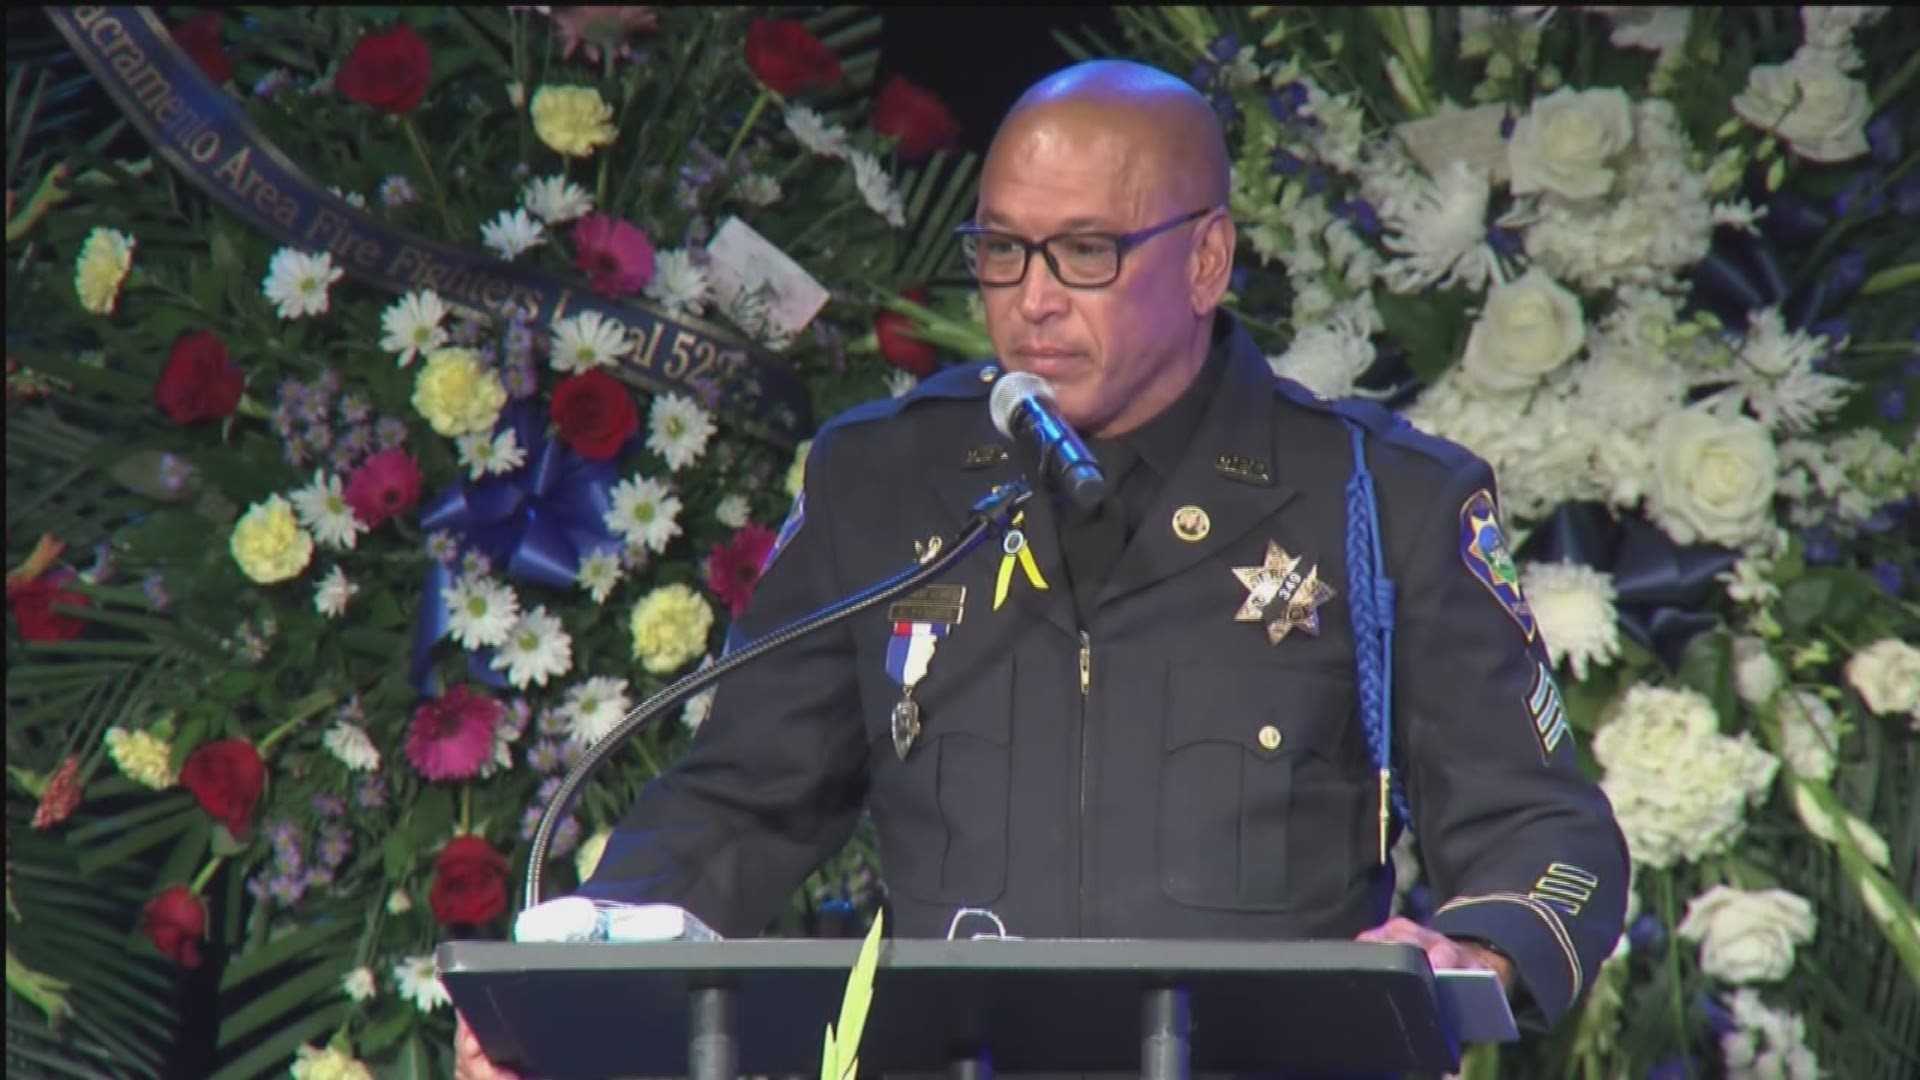 At the memorial for Sacramento Police Officer Tara O'Sullivan, Sgt. Fred Ferrer with the Martinez Police Department shares his memories. Sgt. Ferrer was a mentor to Officer Tara O'Sullivan and a friend of the O'Sullivan family.